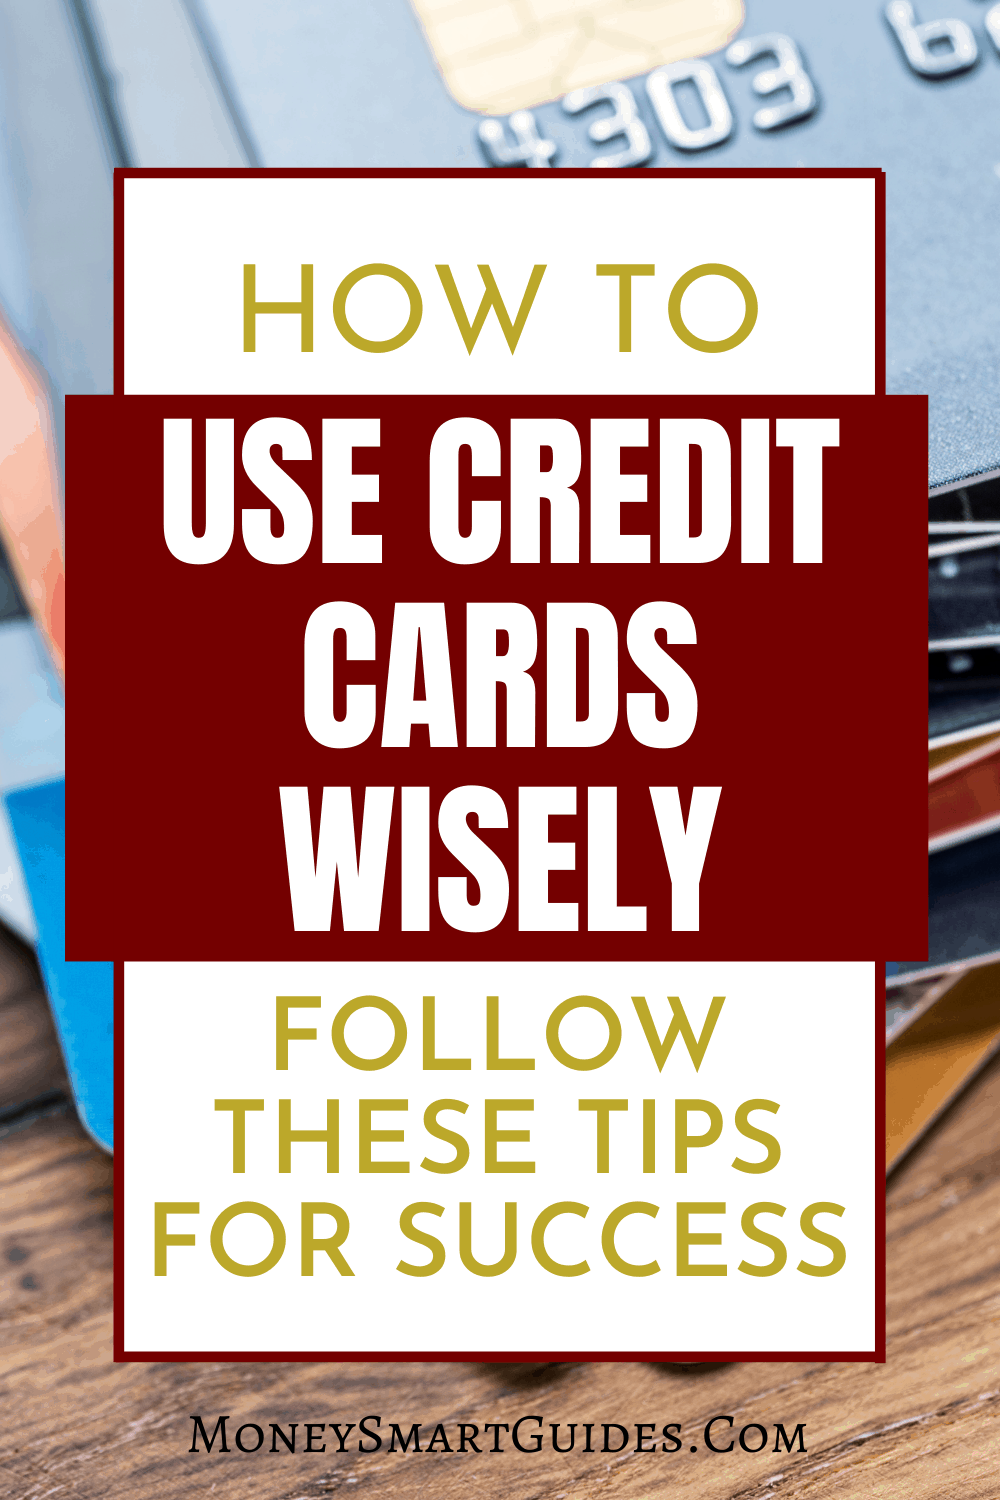 How To Use Credit Cards Wisely In 2021